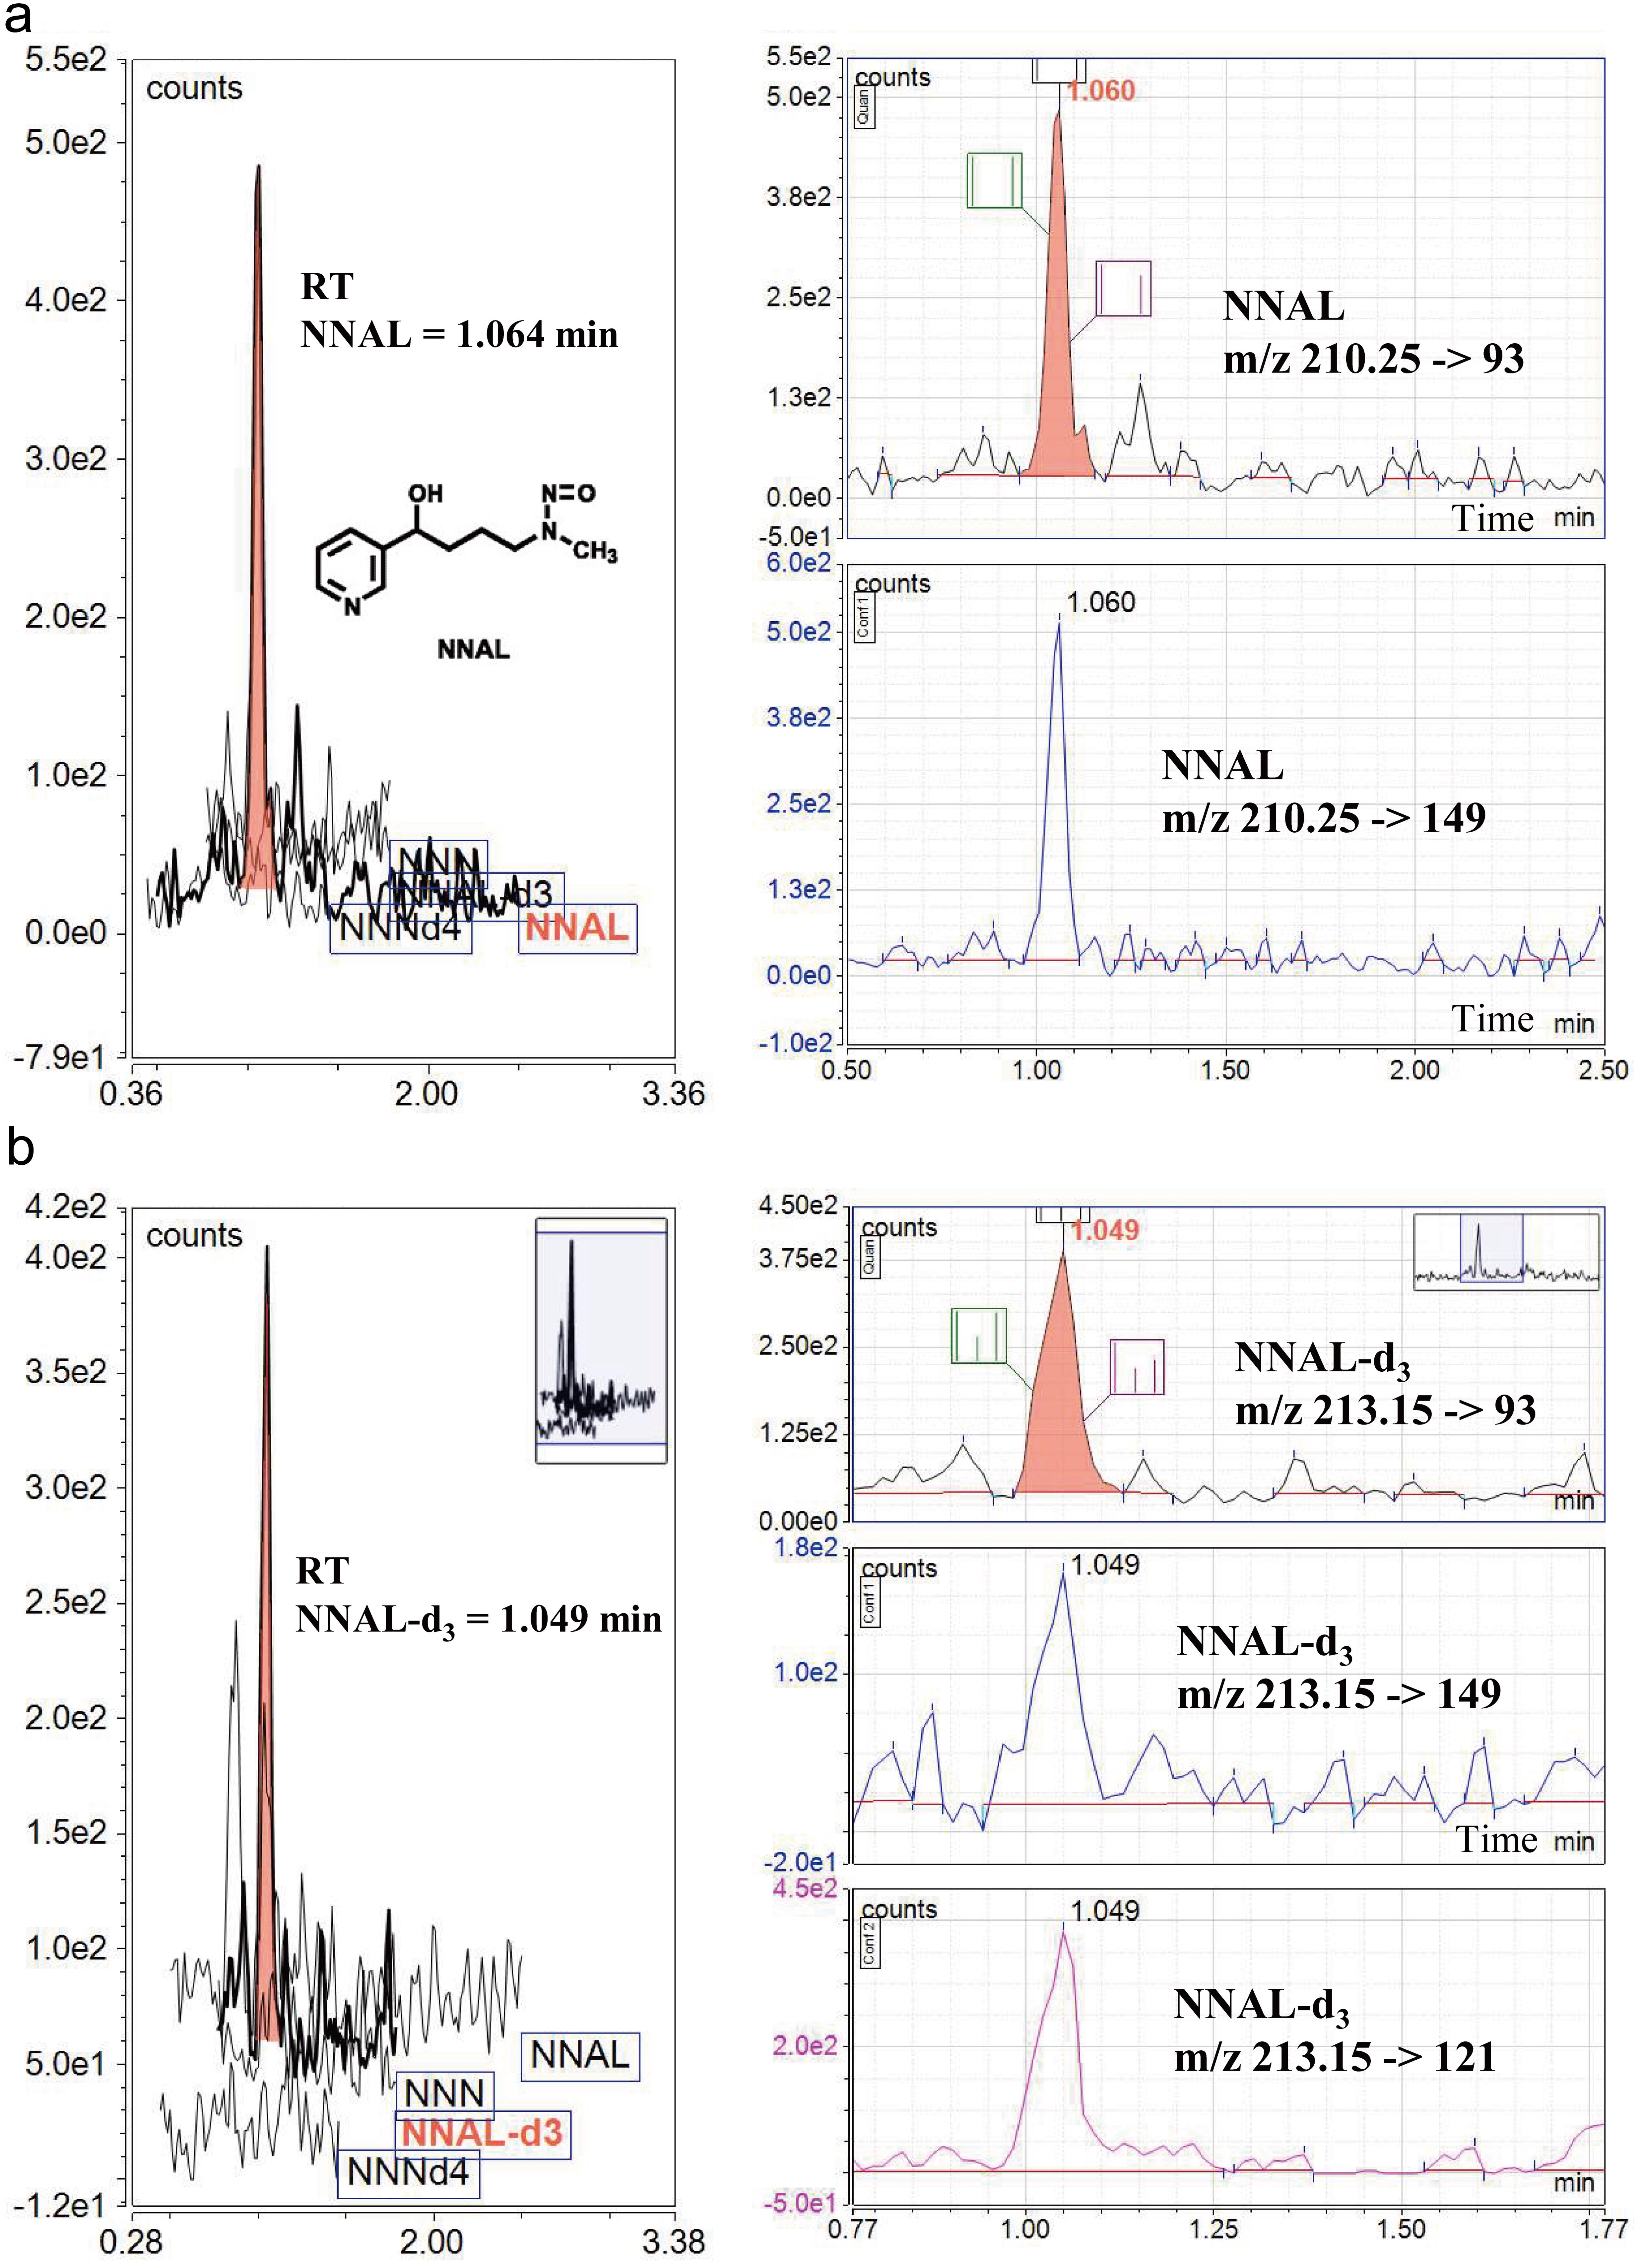 Changes in the total <italic>N</italic>-nitrosonornicotine (NNN) and 4-(methylnitrosamino)-1-(3-pyridyl)-1-butanol (NNAL) metabolites in the urine after consuming Nutri-phenethyl isothiocyanate jelly.